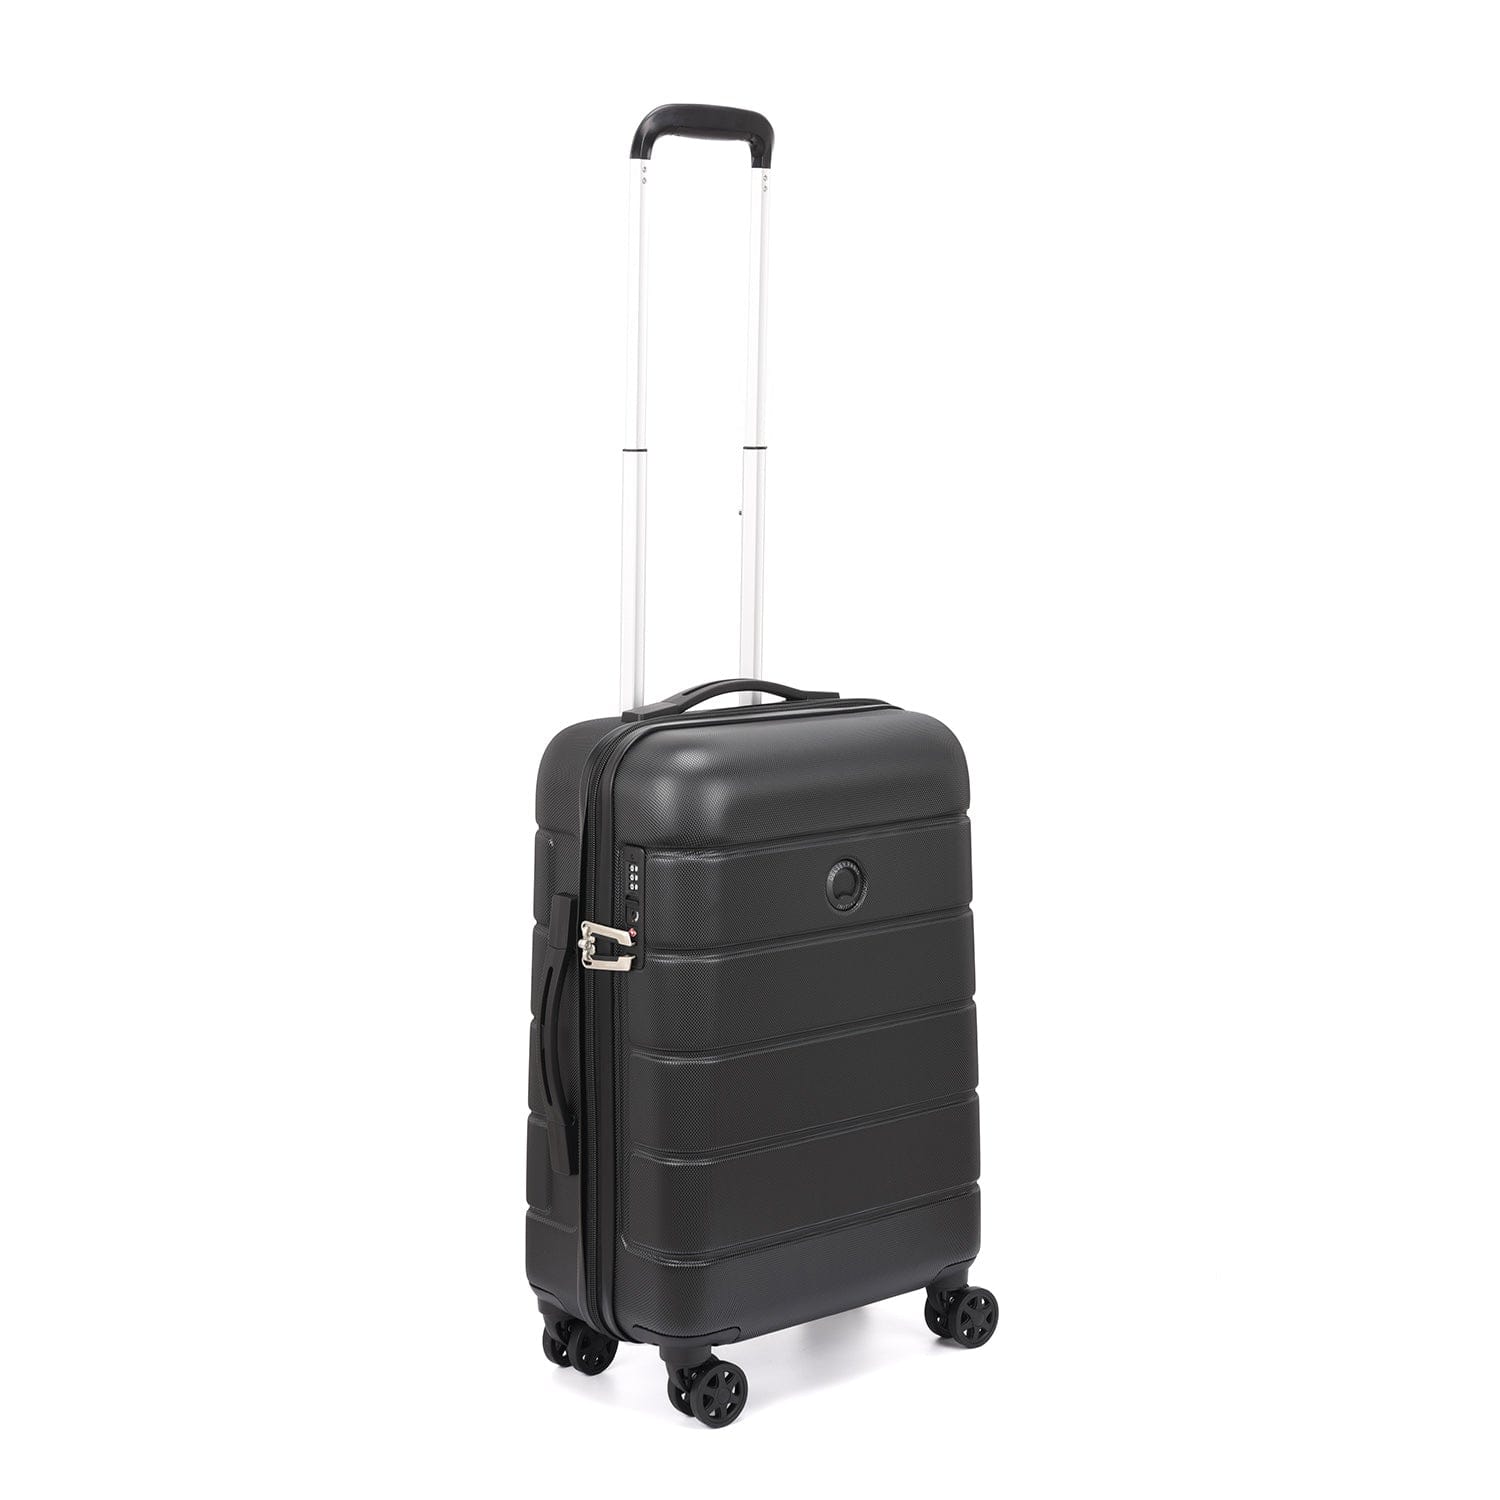 Delsey Lagos 3Piece SET 55+66+76cm Hardcase 4 Double Wheel Cabin & Check-In Luggage Trolley Black + FREE Delsey Agreable Backpack